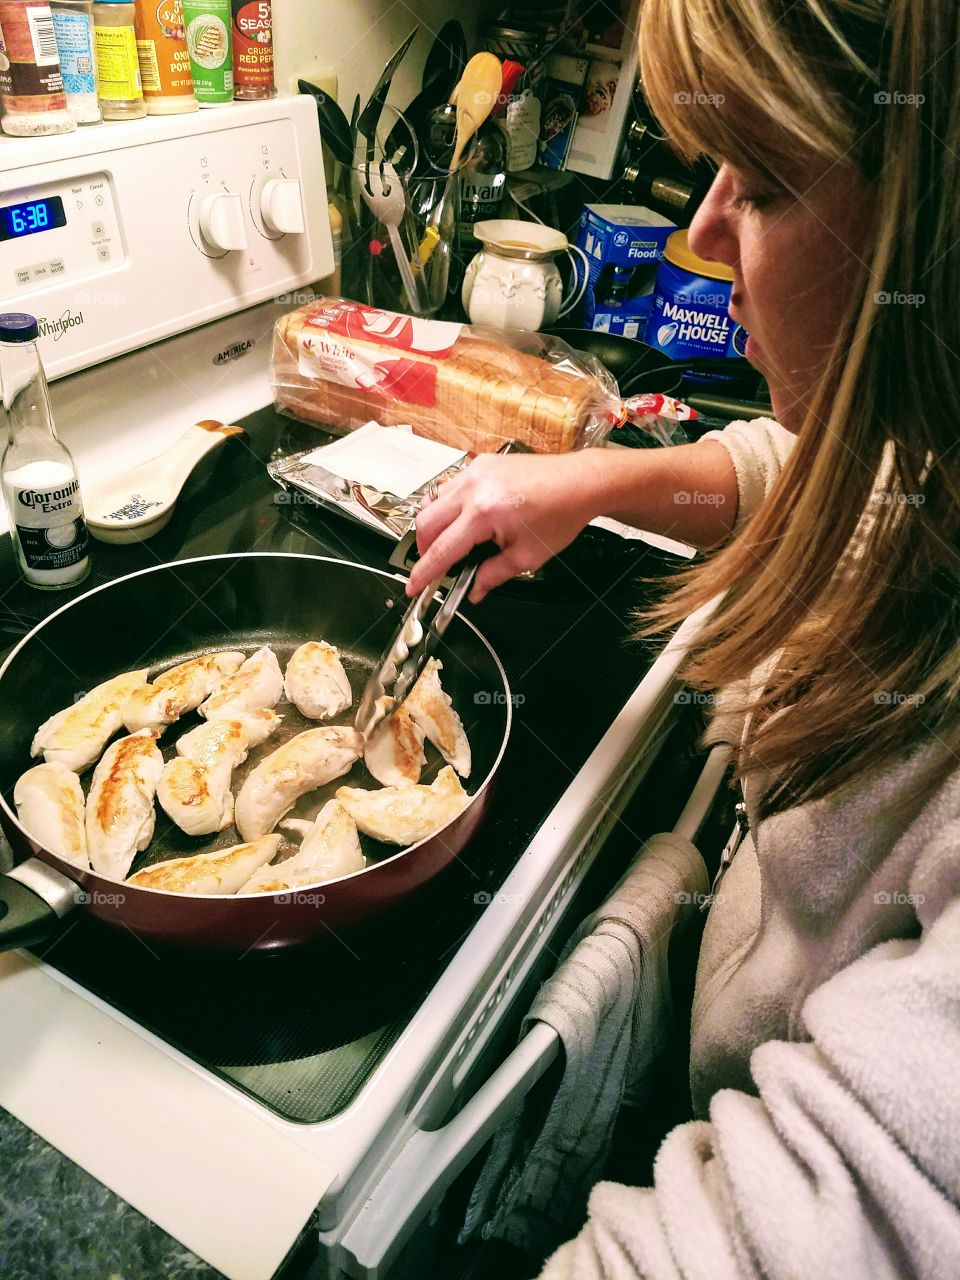 My Daugher cooking a healthy dinner